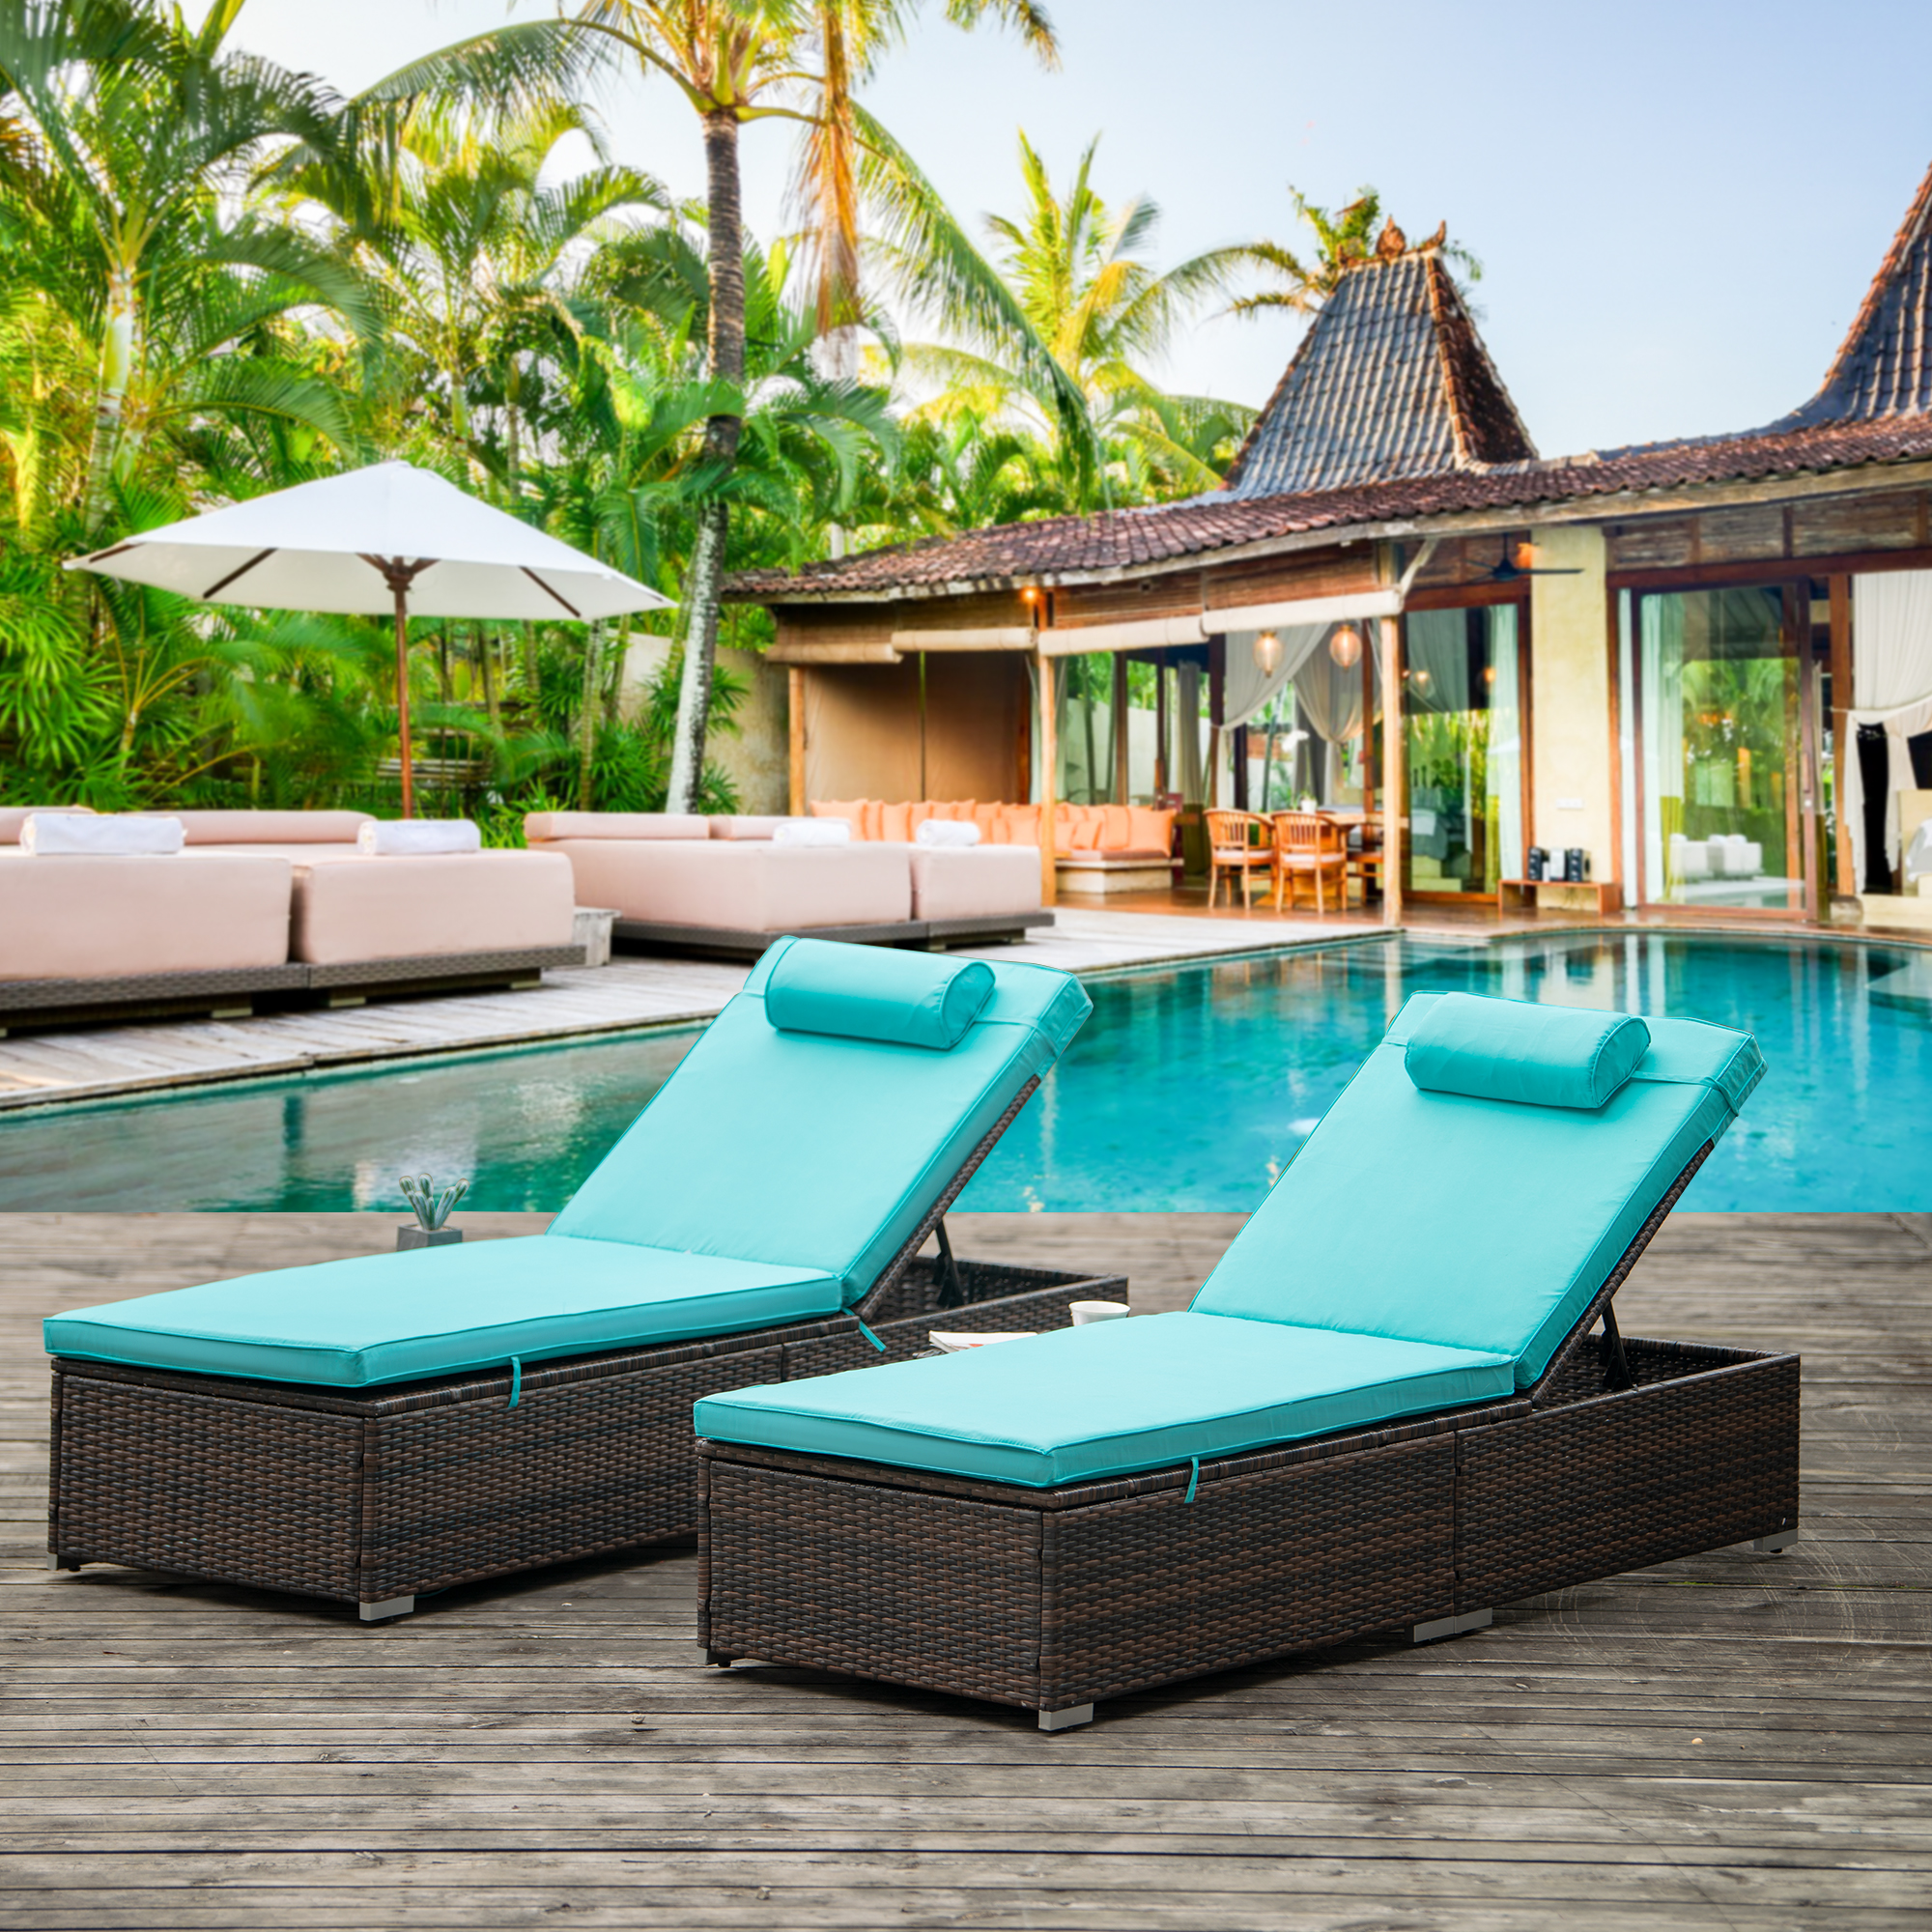 2 Piece Patio Chaise Lounge Furniture Set with Side Table, 5-Position Adjustable Cushioned Rattan Chaise Lounge with Head Pillow, PE Rattan Backrest Lounge Chairs Set for Pool Balcony Deck Yard, B21 - image 1 of 11